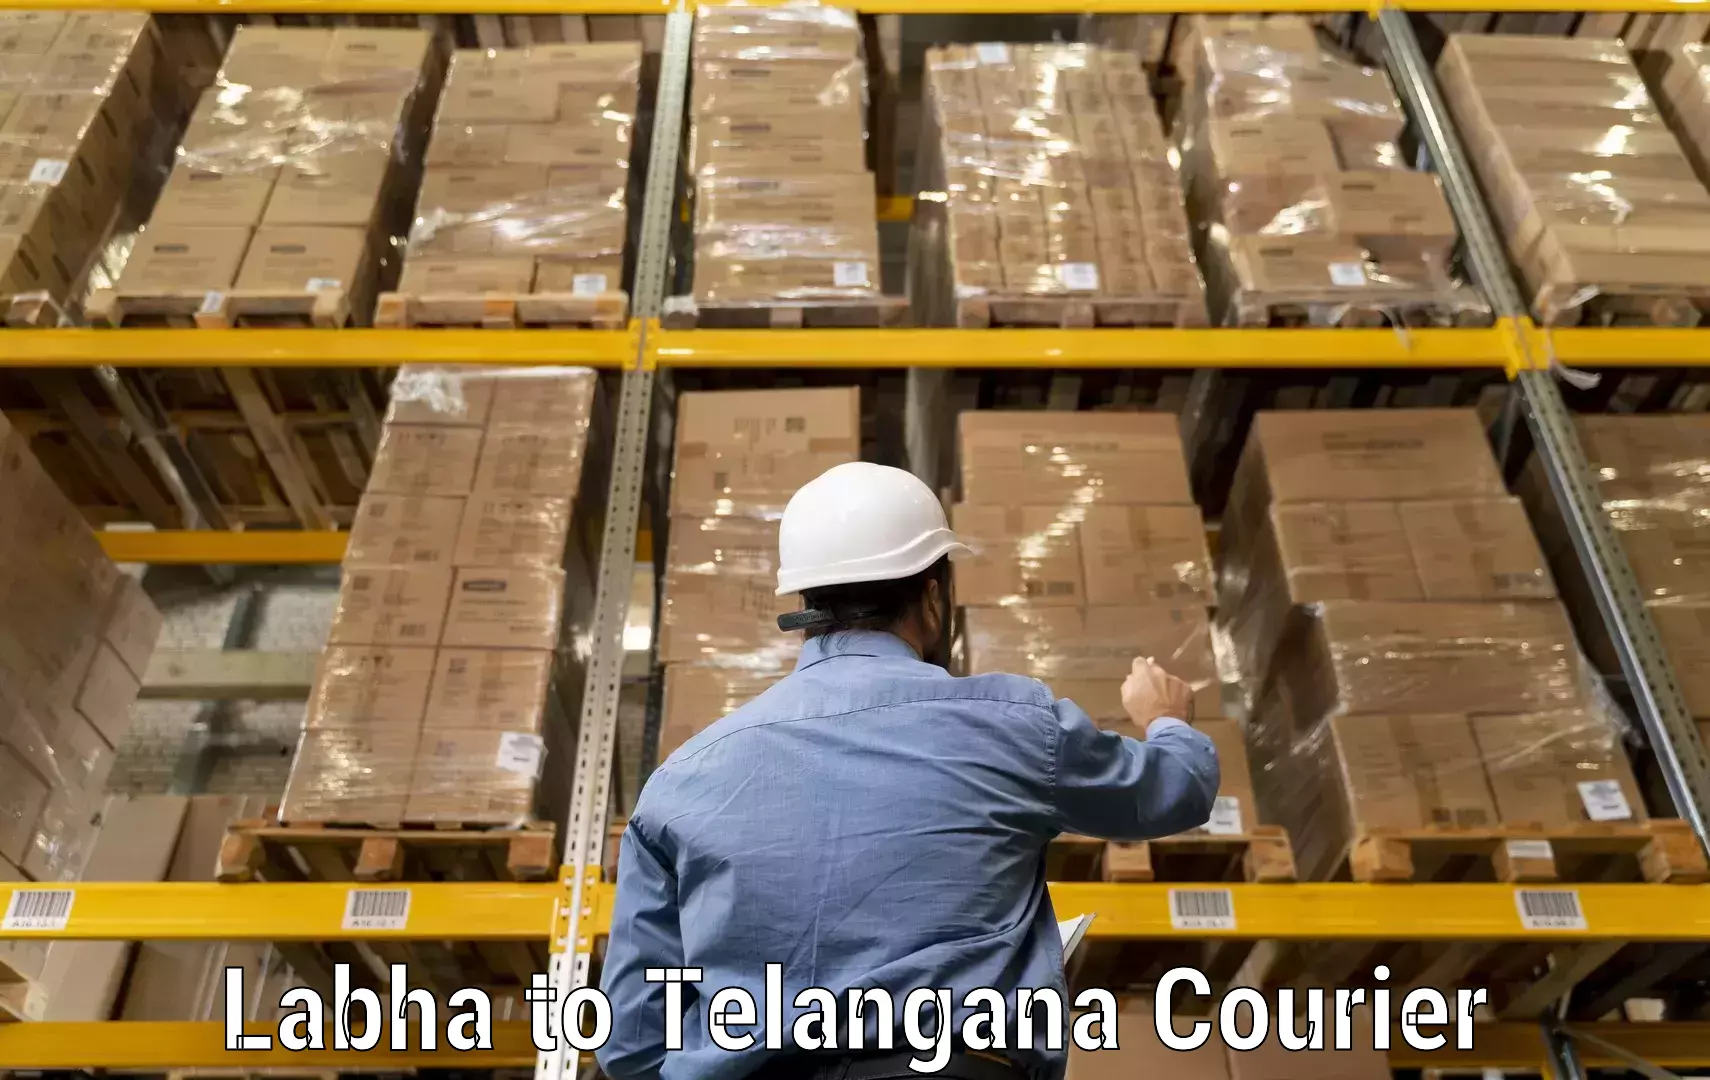 Global courier networks Labha to Narayanpet